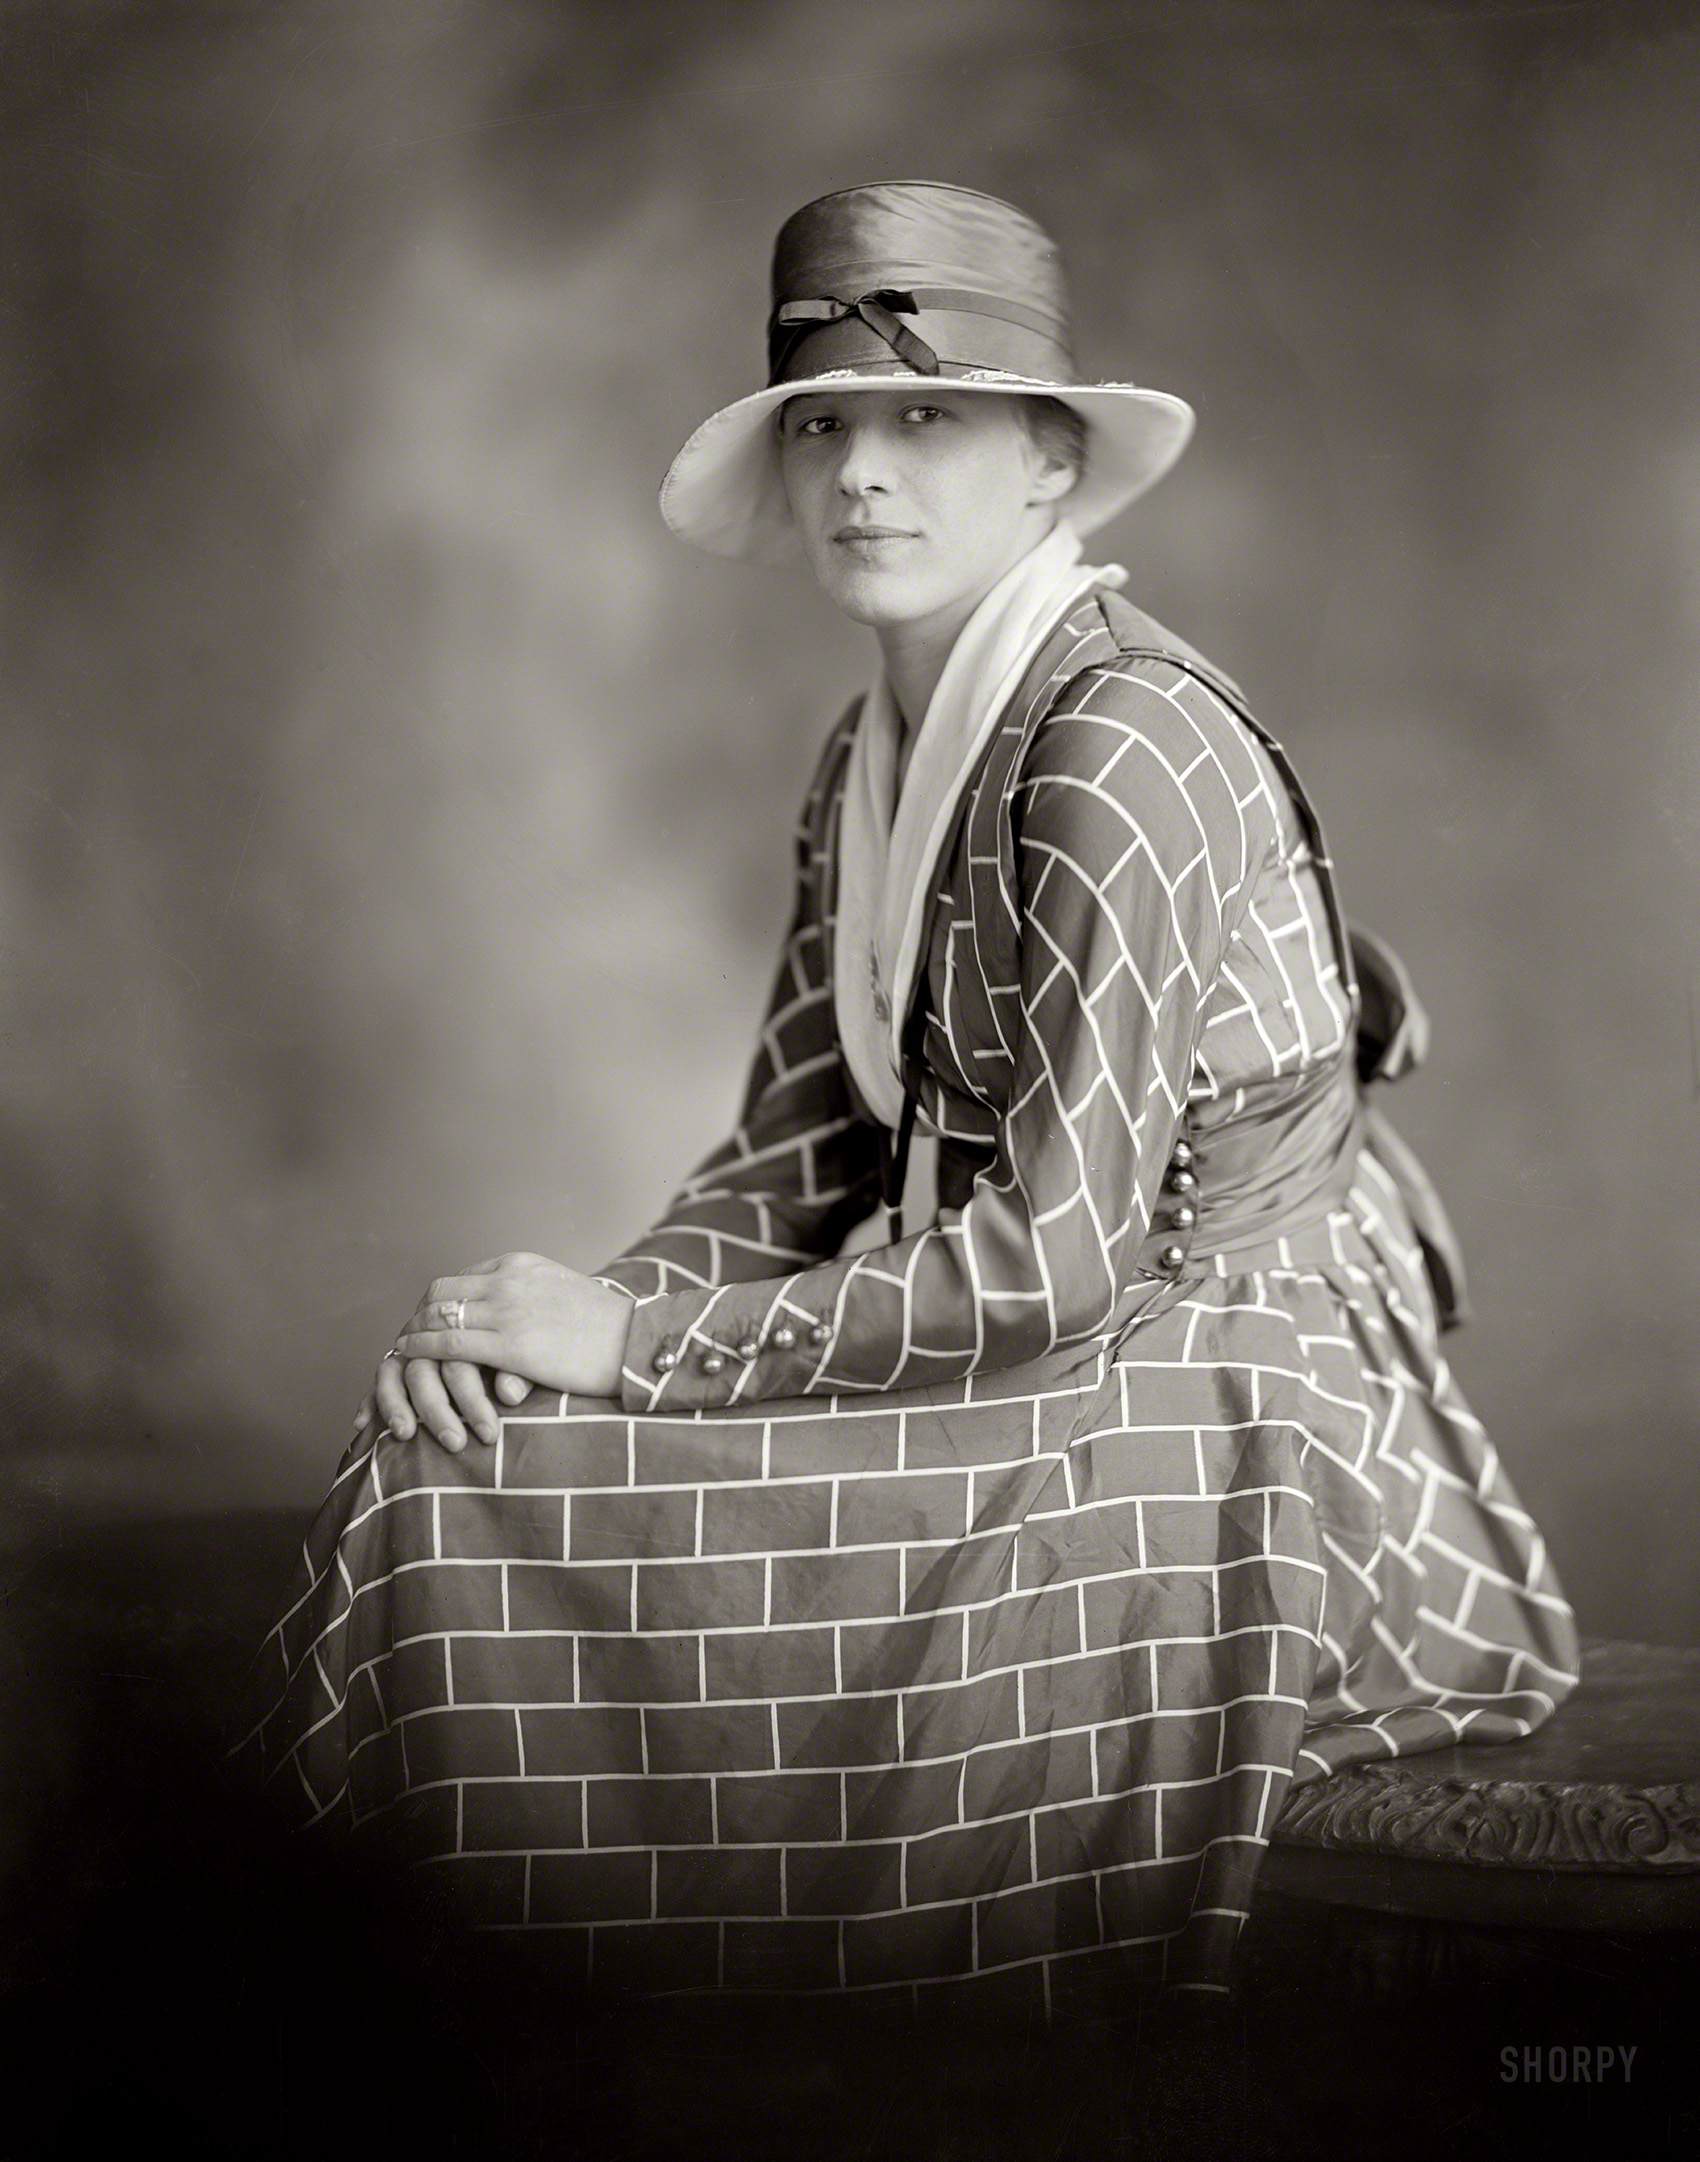 Washington, D.C., circa 1920. "Swartzbaugh, C.E., Mrs." Who'll be the first to write on her wall? Harris & Ewing Collection glass negative. View full size.